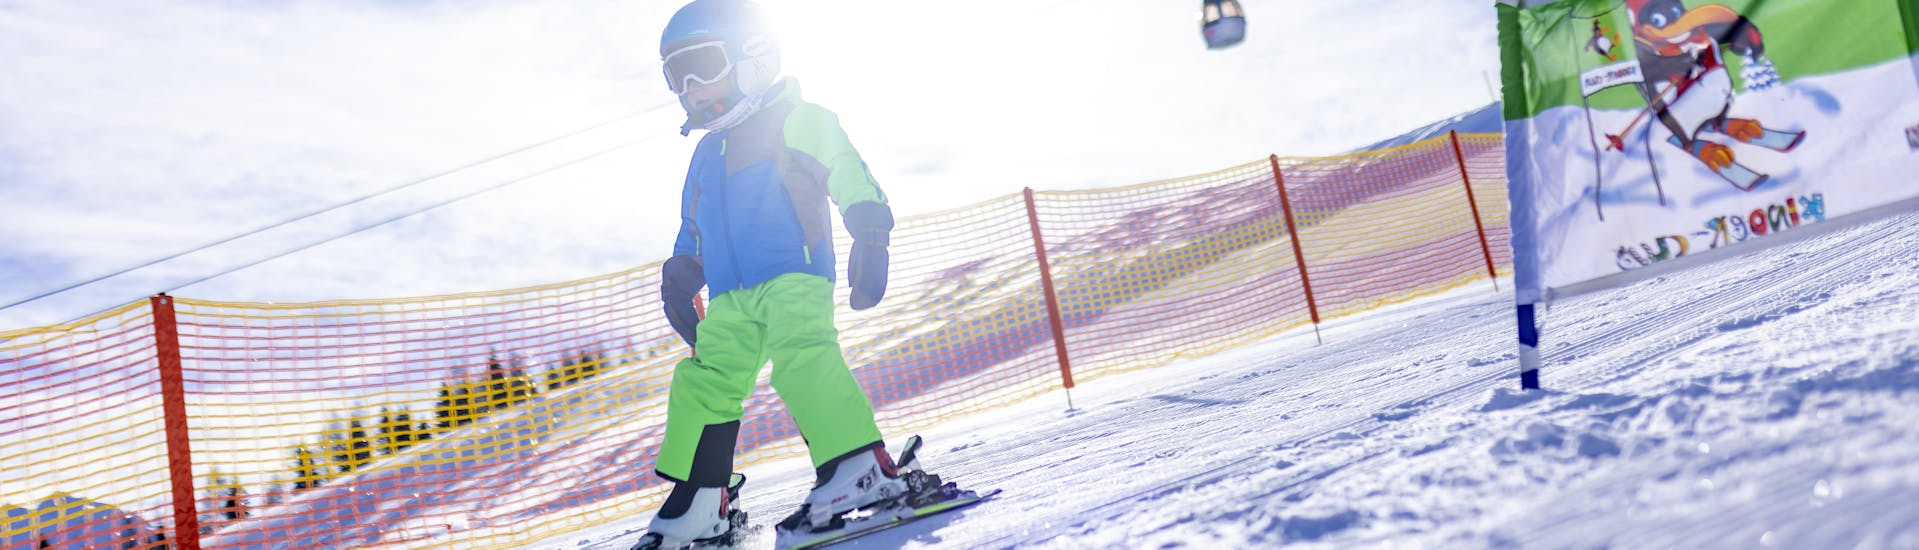 A little skier descends the slopes during his private ski lesson for kids of all ages with the Nassfeld Ski School.